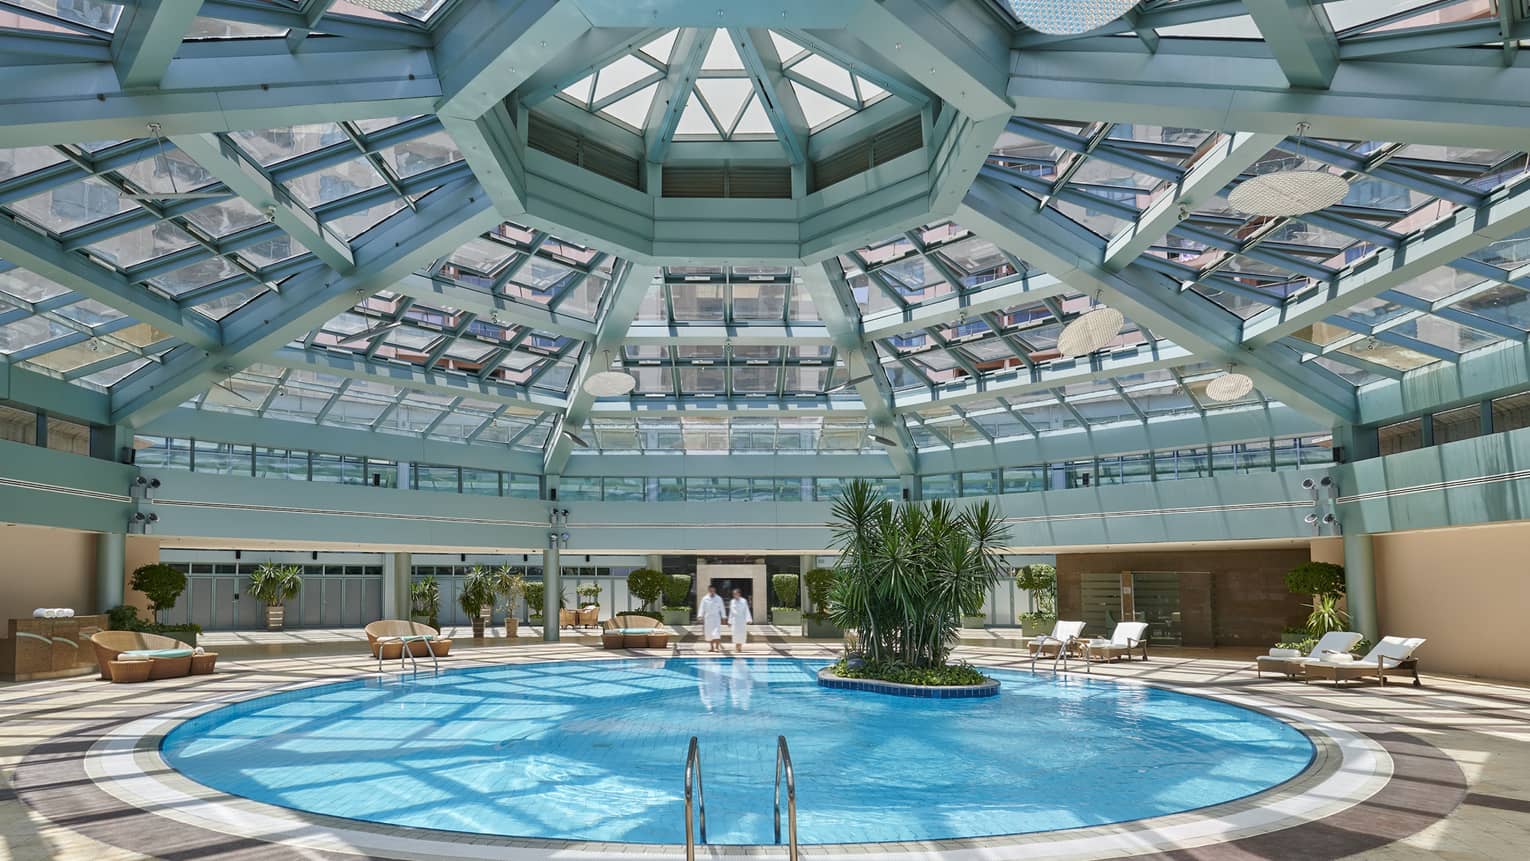 Skylights pour in natural light over the indoor pool at four seasons hotel alexandria 